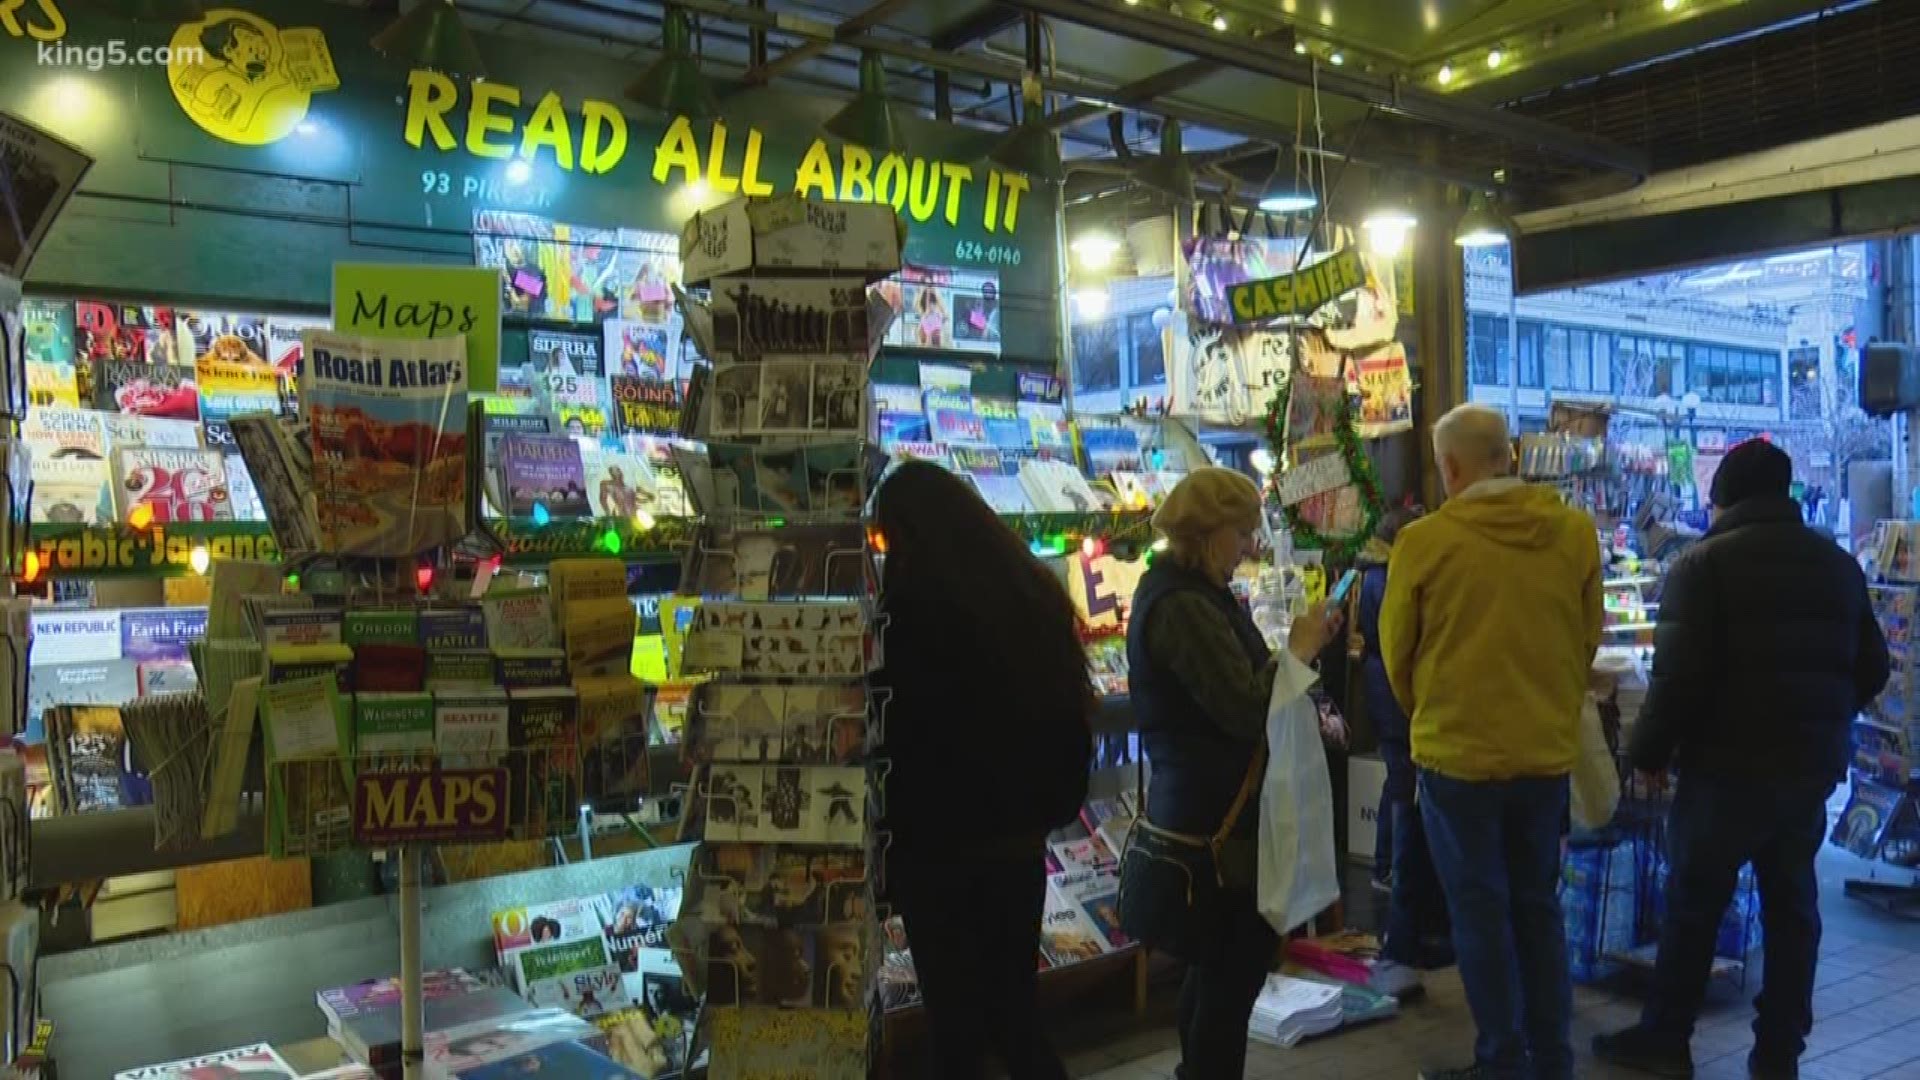 After 40 years inside Pike Place Market, First & Pike News will close on December 31, 2019.